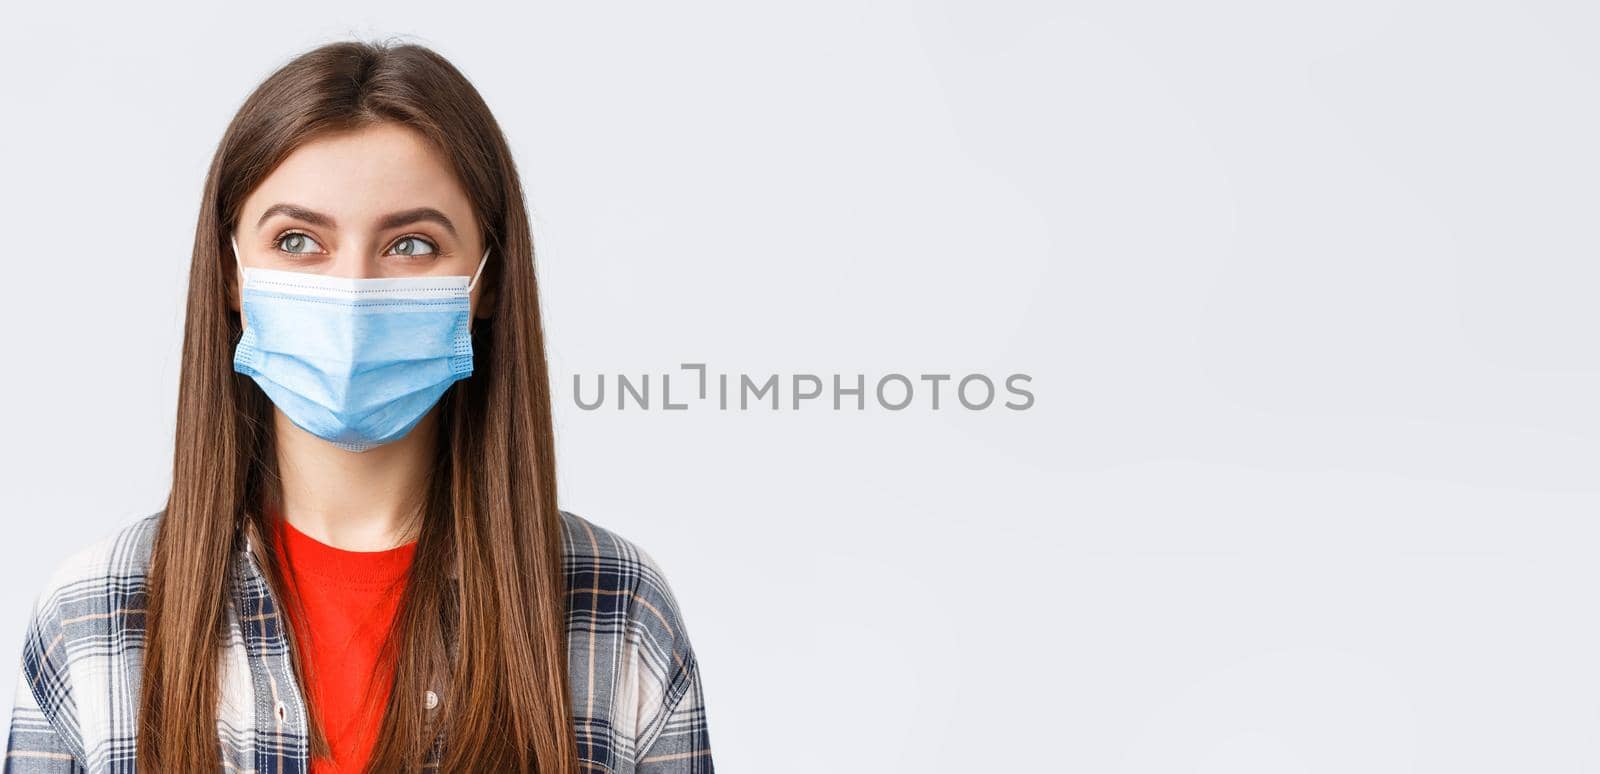 Coronavirus outbreak, leisure on quarantine, social distancing and emotions concept. Close-up of pleased cute girl smiling in medical mask, looking left at pleasant good thing, white background.